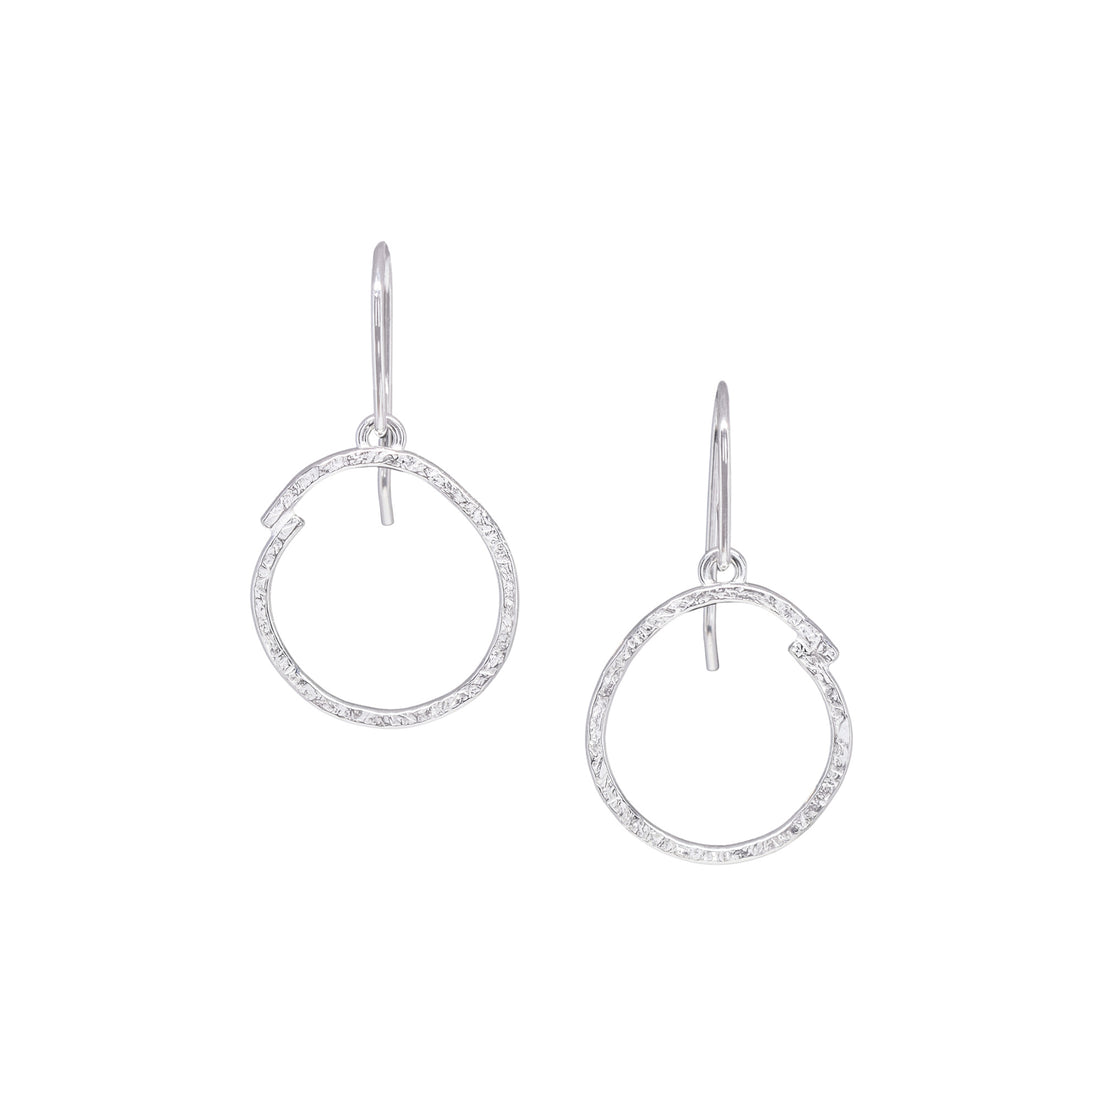 Sketch Earrings - Small - Bright Sterling